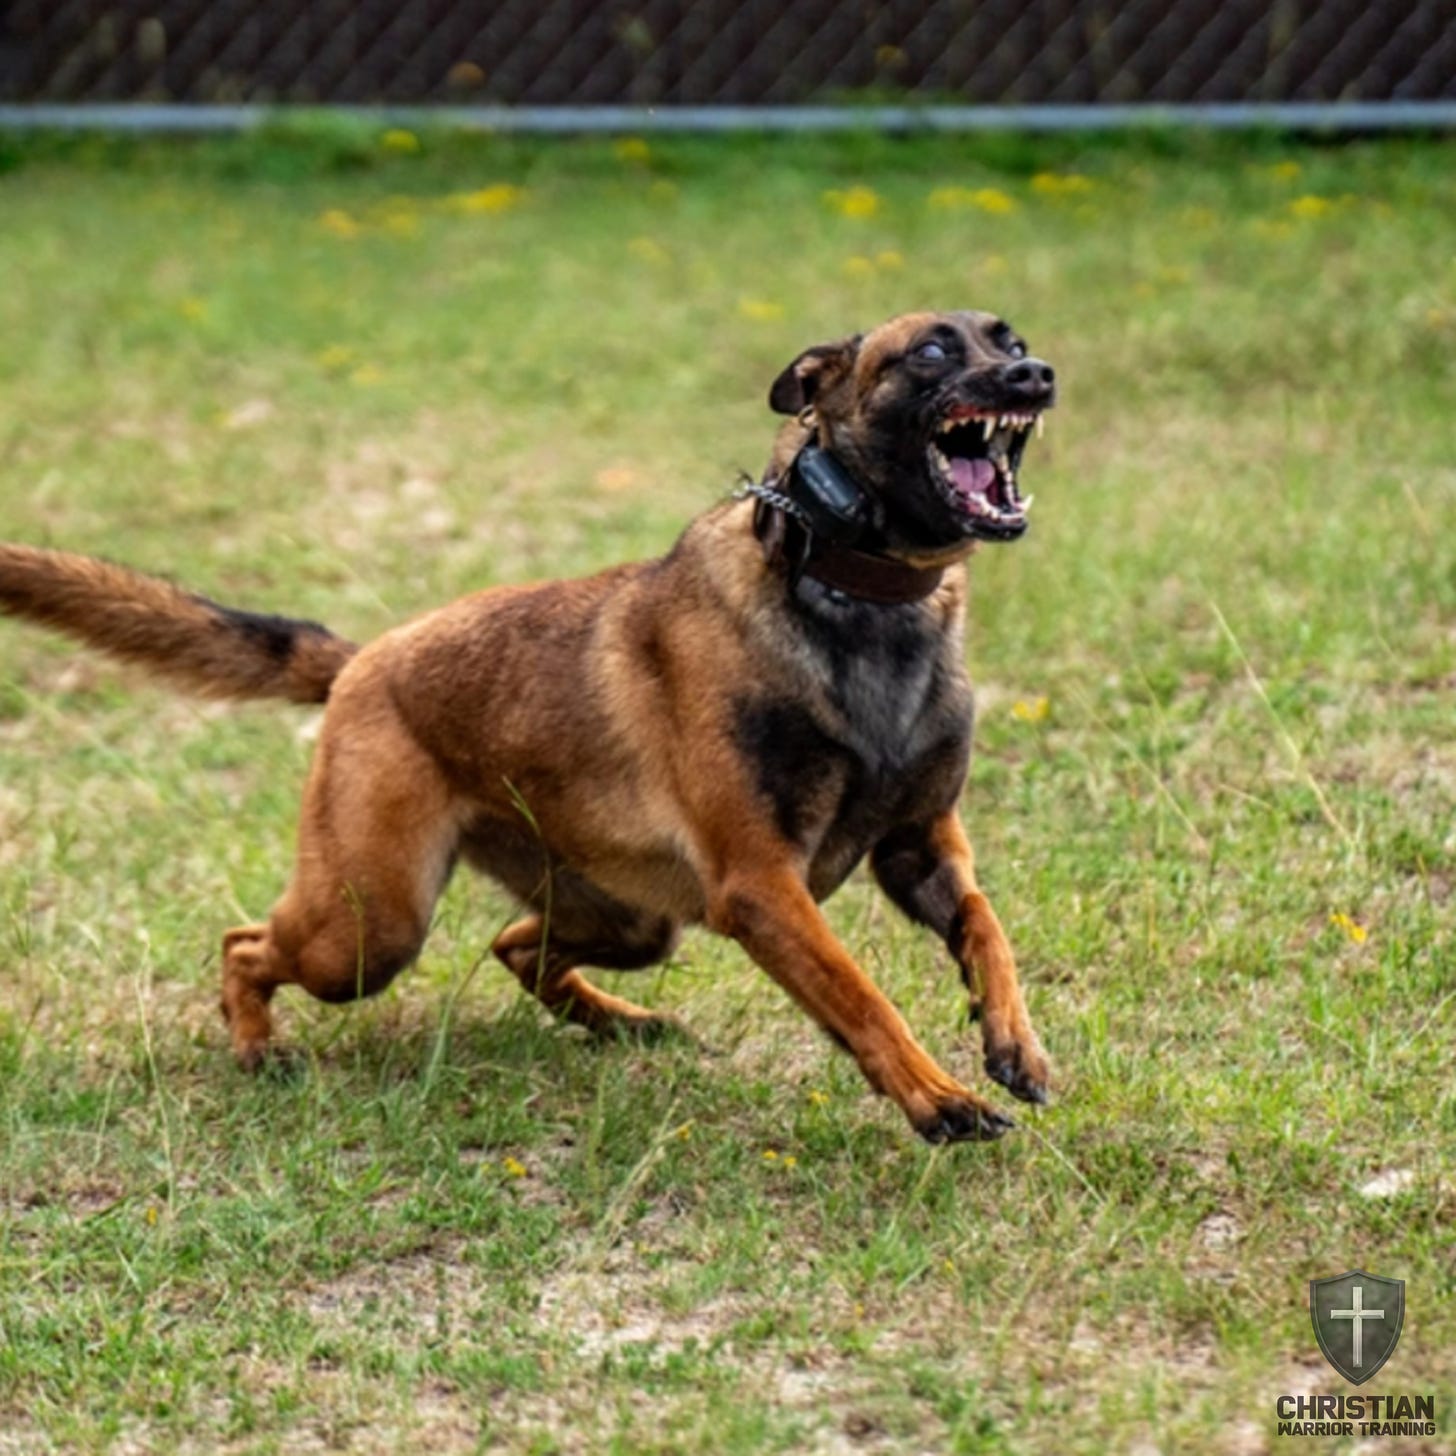 Handling Dangerous Dogs: From Less Lethal to Deadly Force